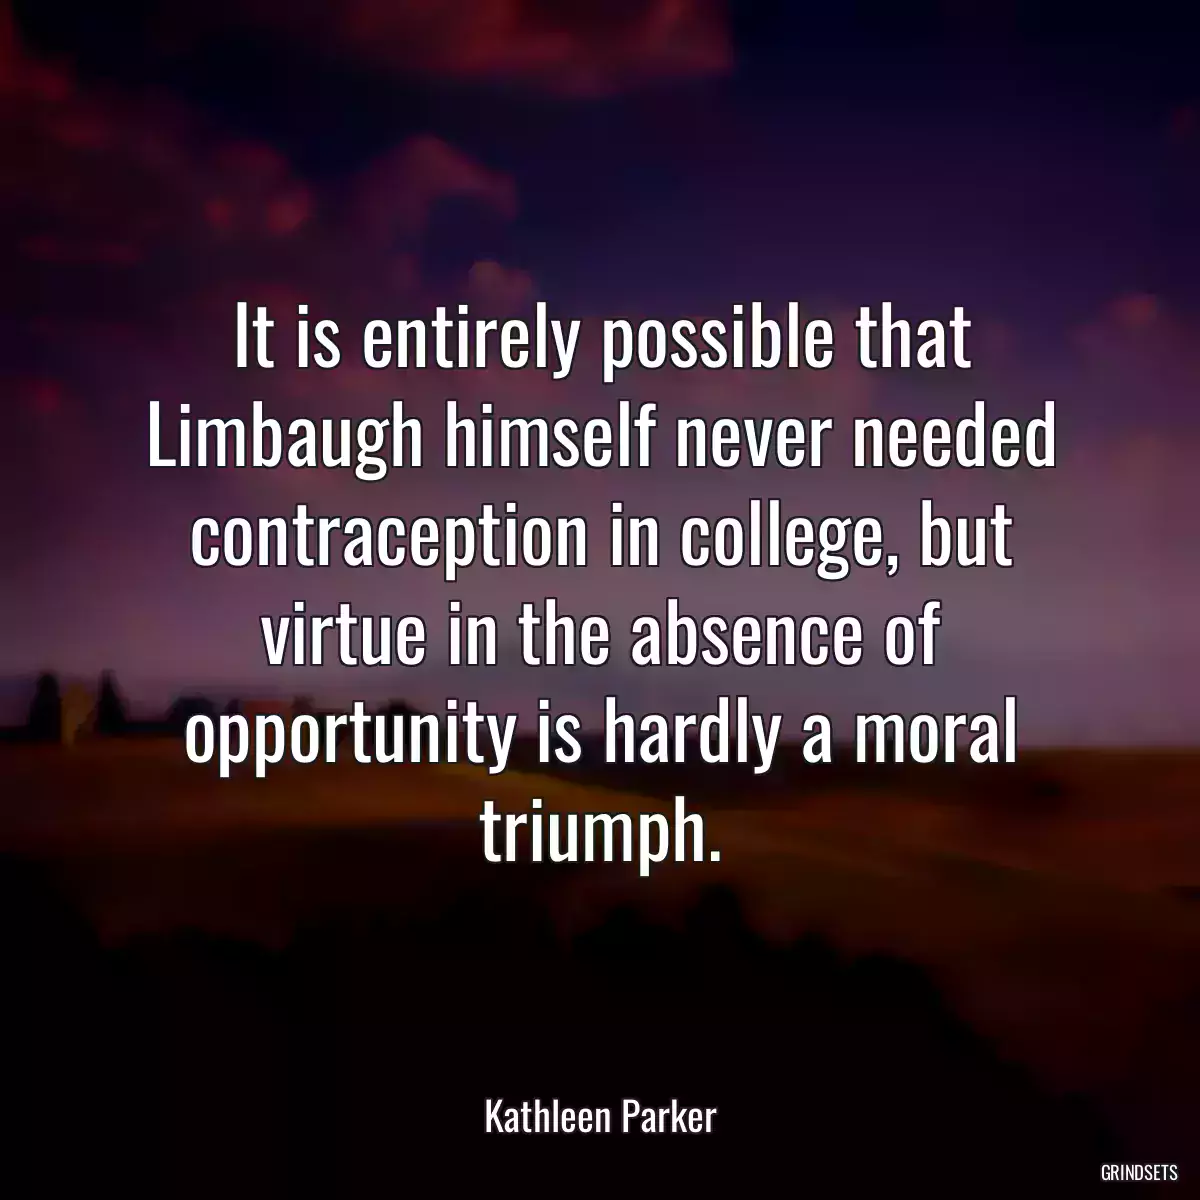 It is entirely possible that Limbaugh himself never needed contraception in college, but virtue in the absence of opportunity is hardly a moral triumph.